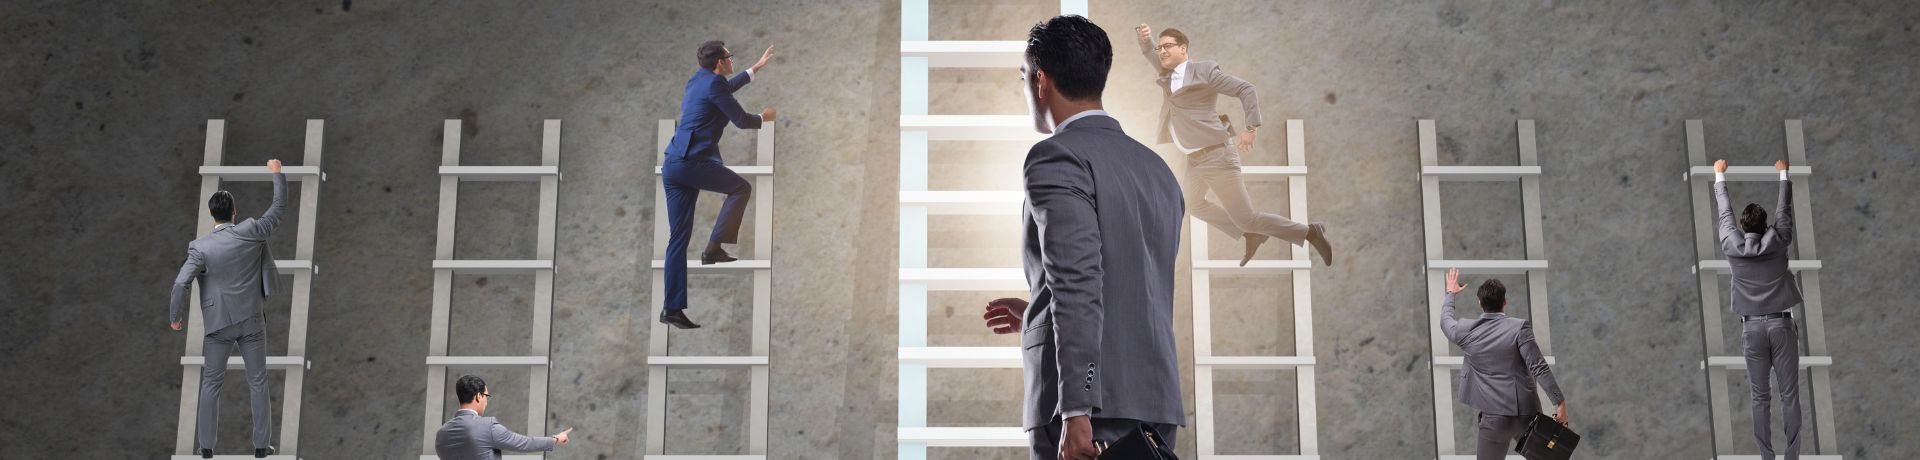 How to Climb the Project Management Career Ladder